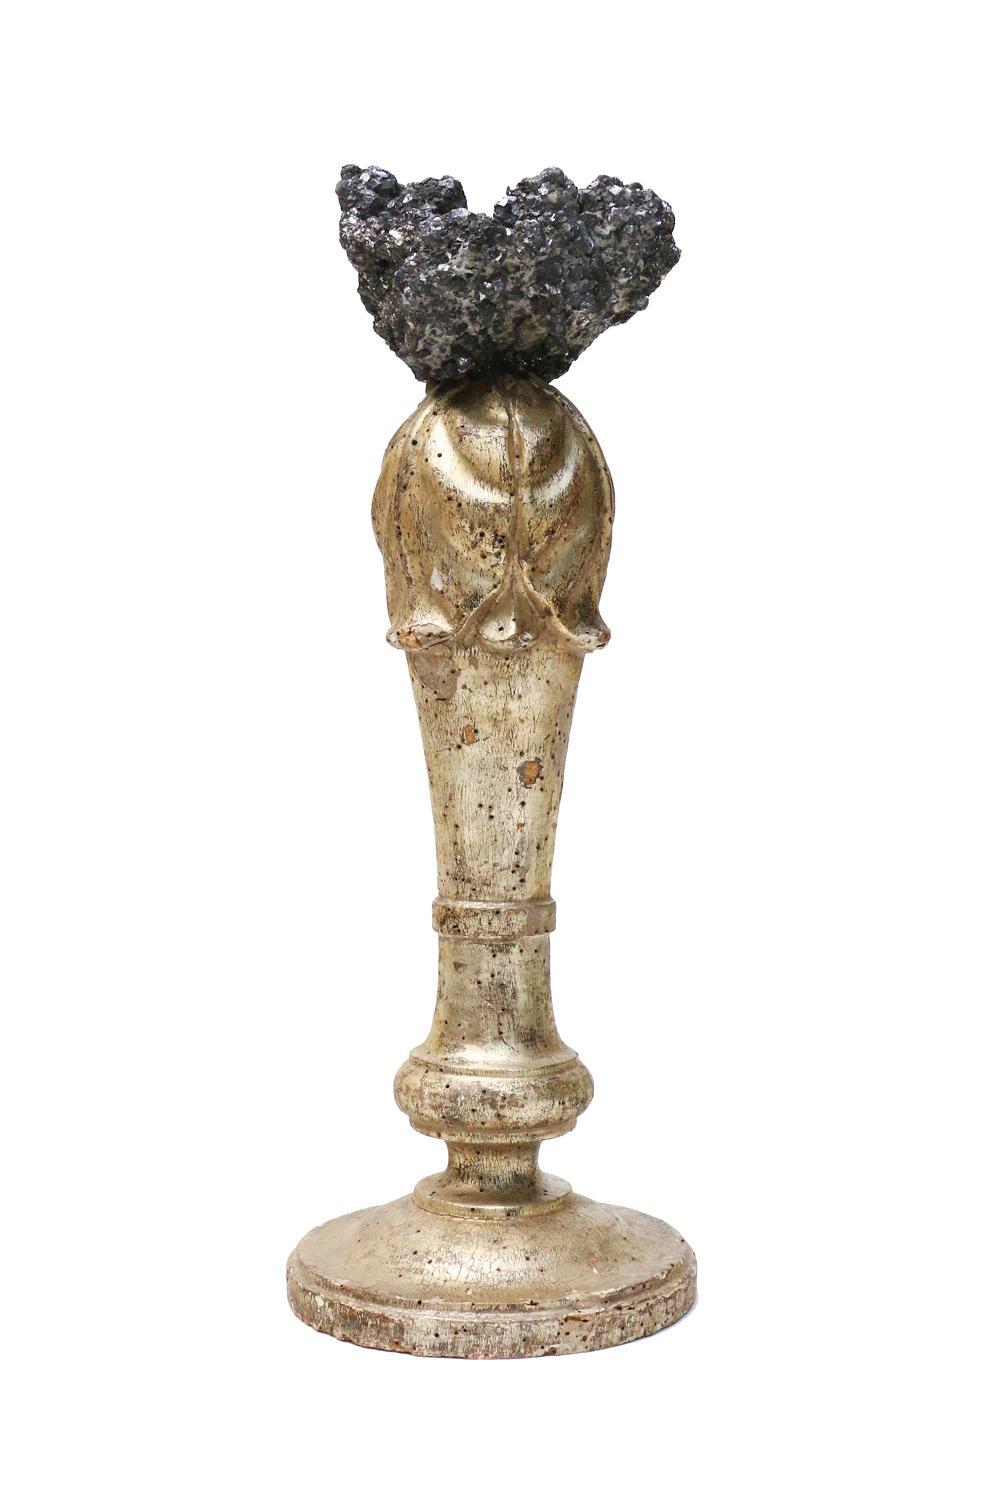 Sculptural 18th Century Italian Candlestick Fragment with Galena and Pyrite In Good Condition For Sale In Dublin, Dalkey